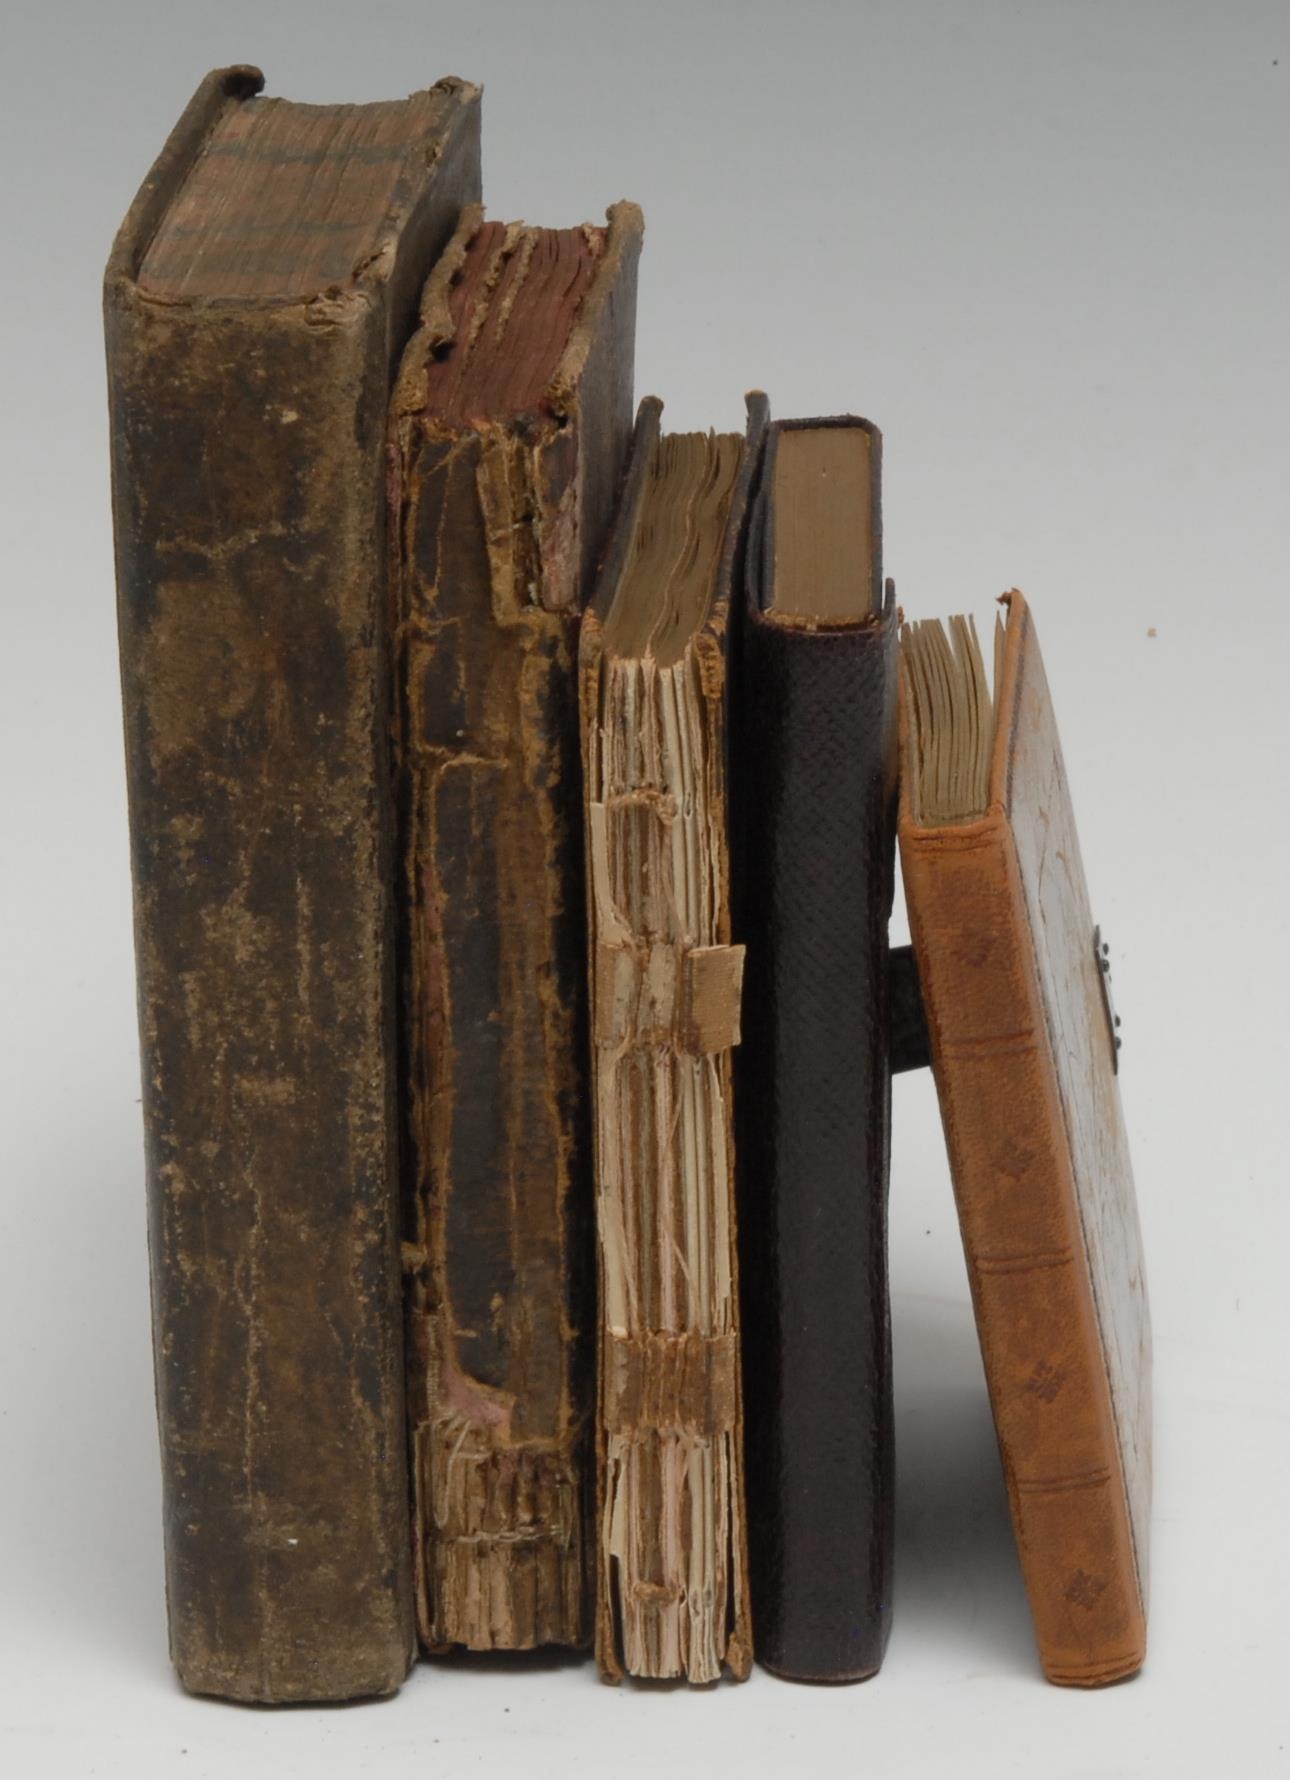 An early Victorian Essex businessman’s notebook, inscribed in ink and pencil MS. with drafts or